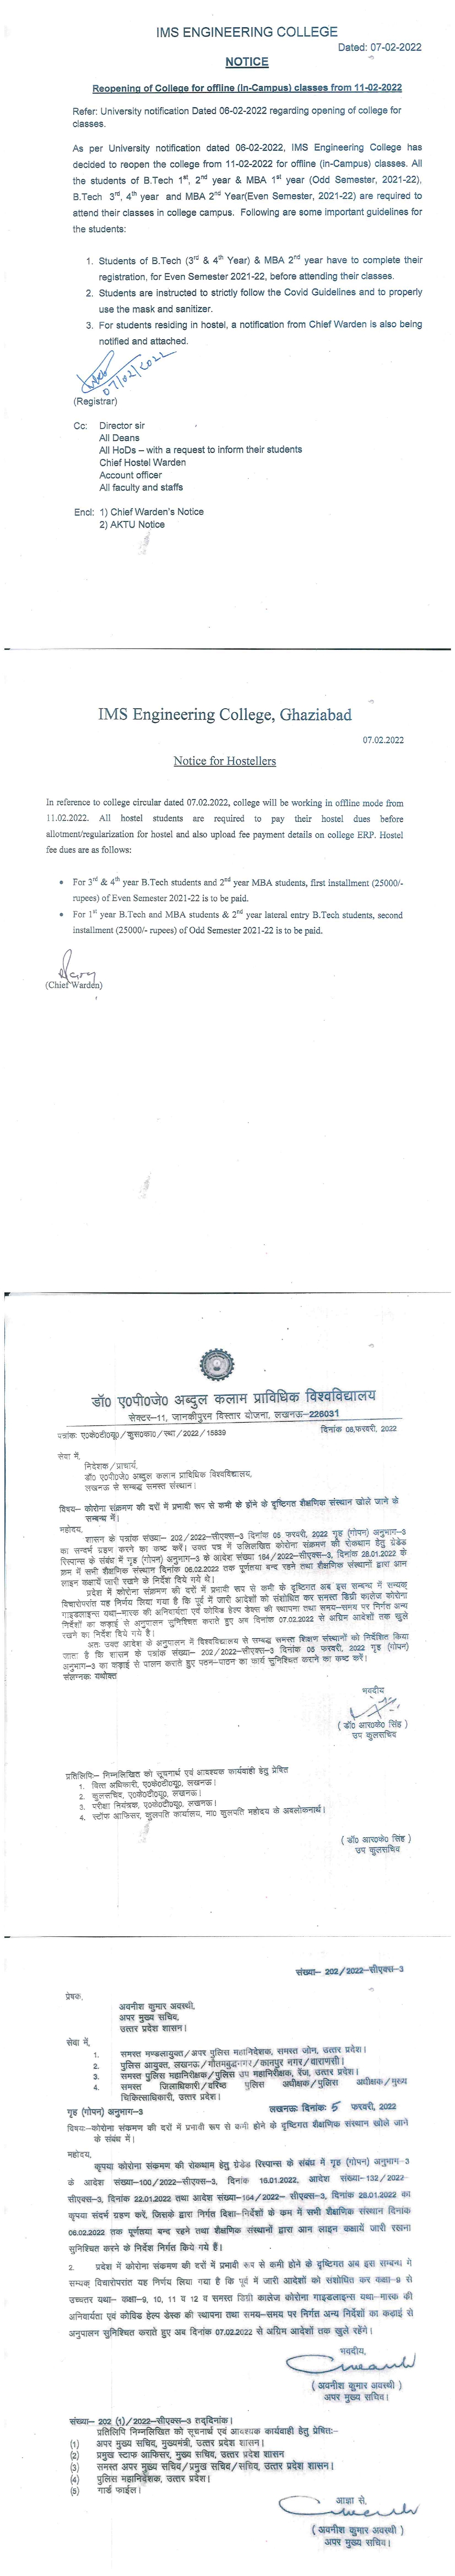 Refer: University notification Dated 06-02-2022 regarding opening of college for classes